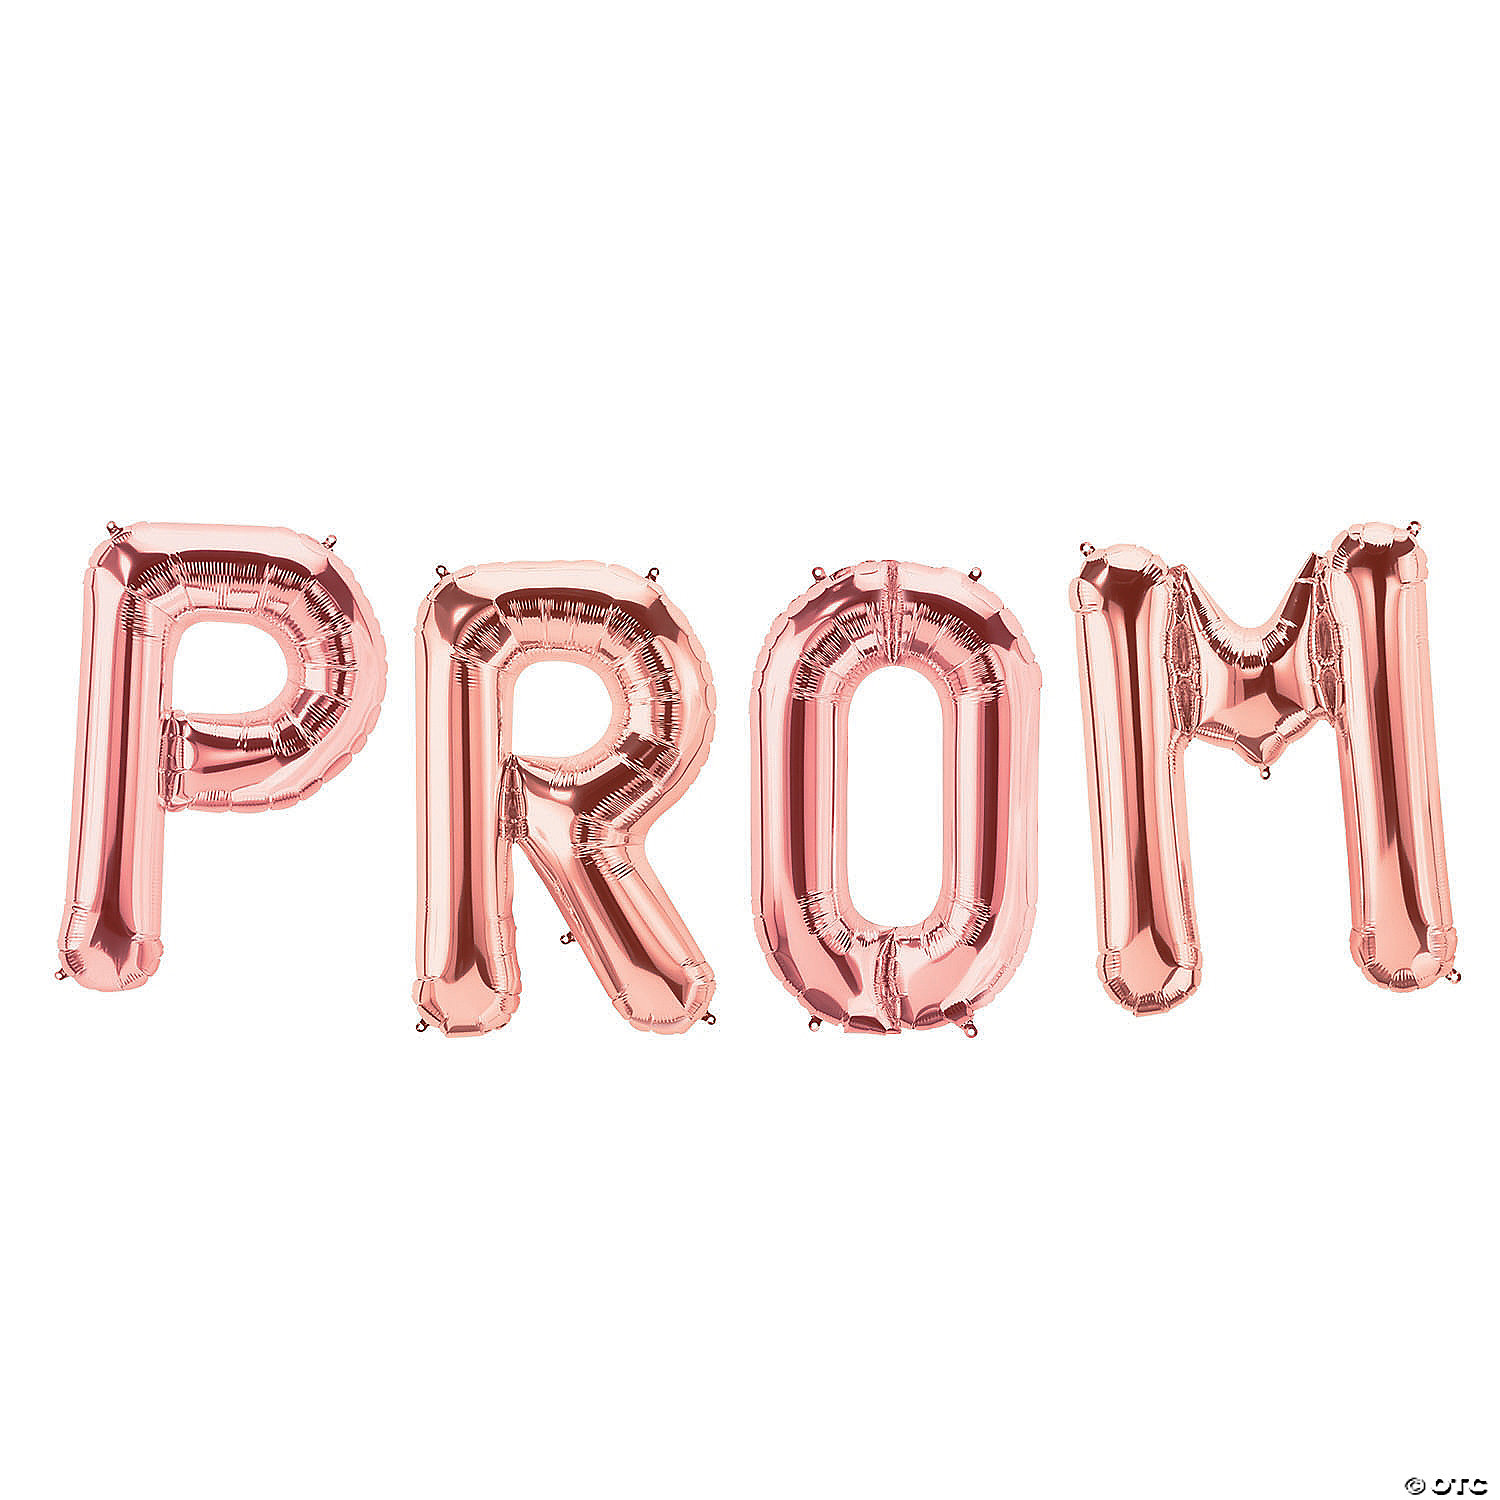 PROM - Rose Gold DCUK PROM 2019 16 ROSE GOLD LETTER BALLOONS DECORATION